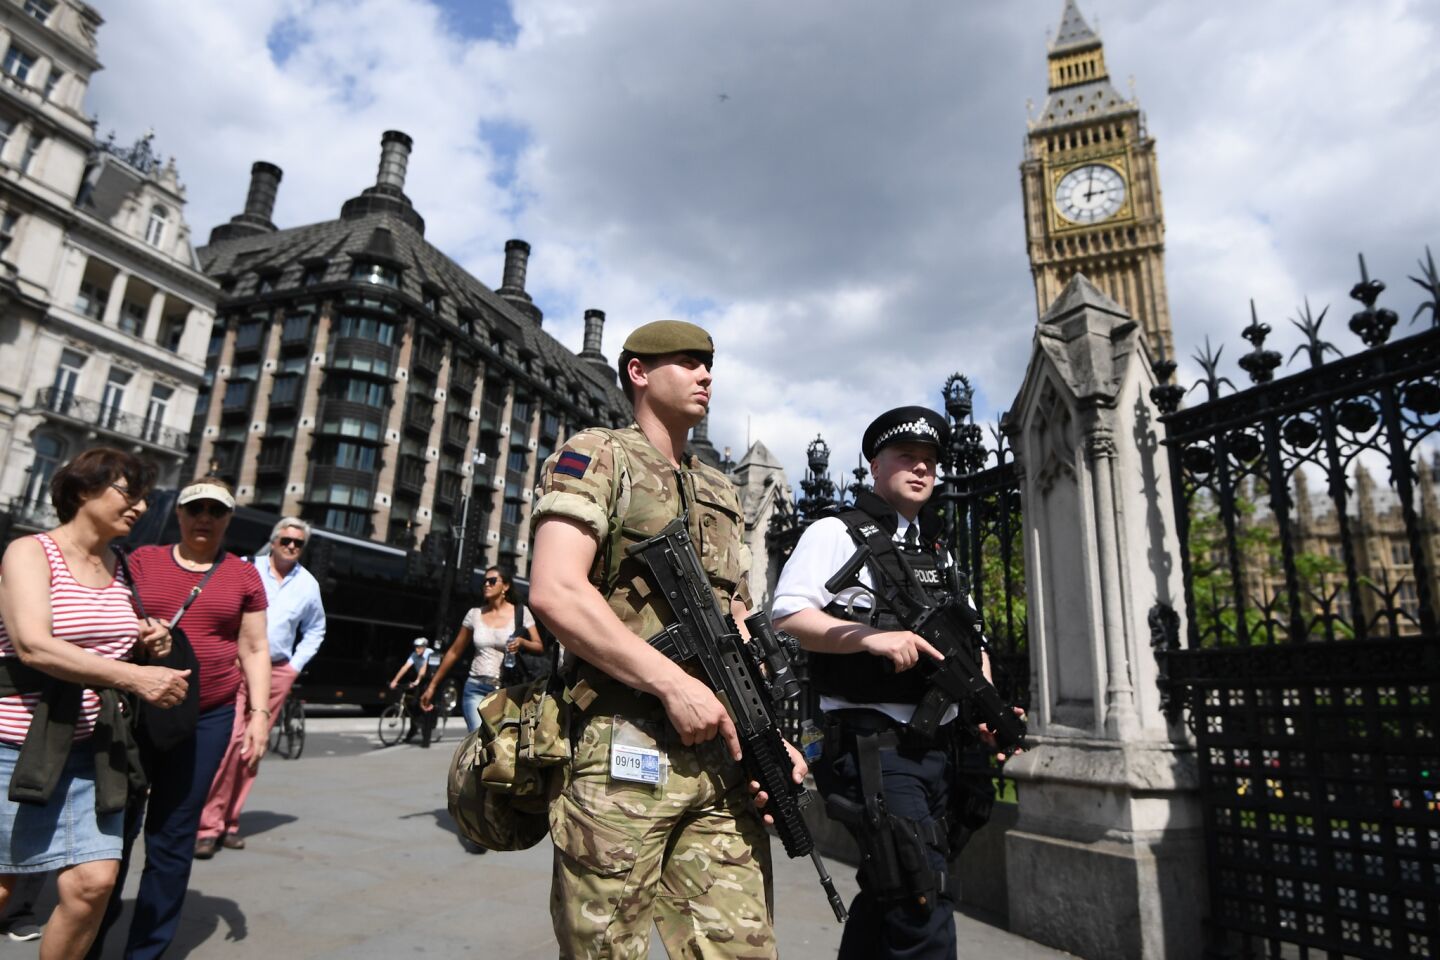 A soldier and police officer patrol outside the Houses of Parliament in London on Wednesday. Nearly a thousand military personnel are being deployed around the country as the UK terror status is elevated to critical in the wake of the terrorist attack at Manchester Arena.